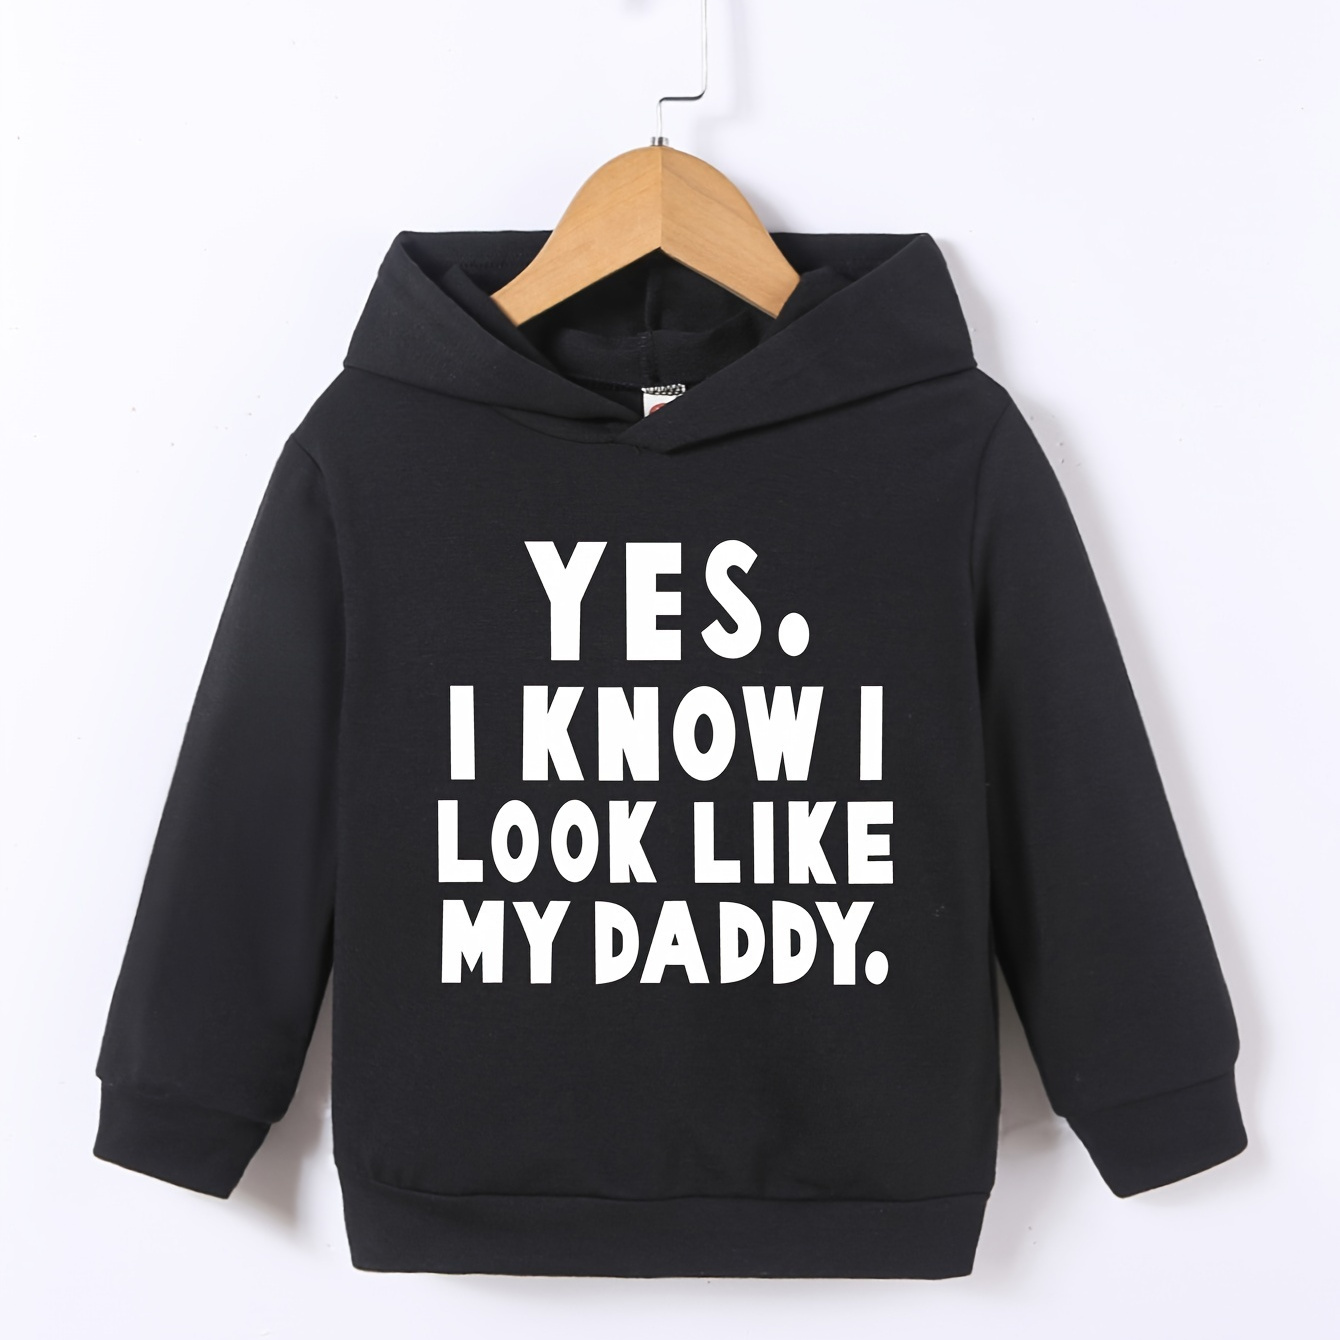 

Yes I Know I Look Like My Daddy Letter Print Boys Casual Pullover Long Sleeve Hoodies, Boys Sweatshirt For Spring Fall, Kids Hoodie Tops Outdoor